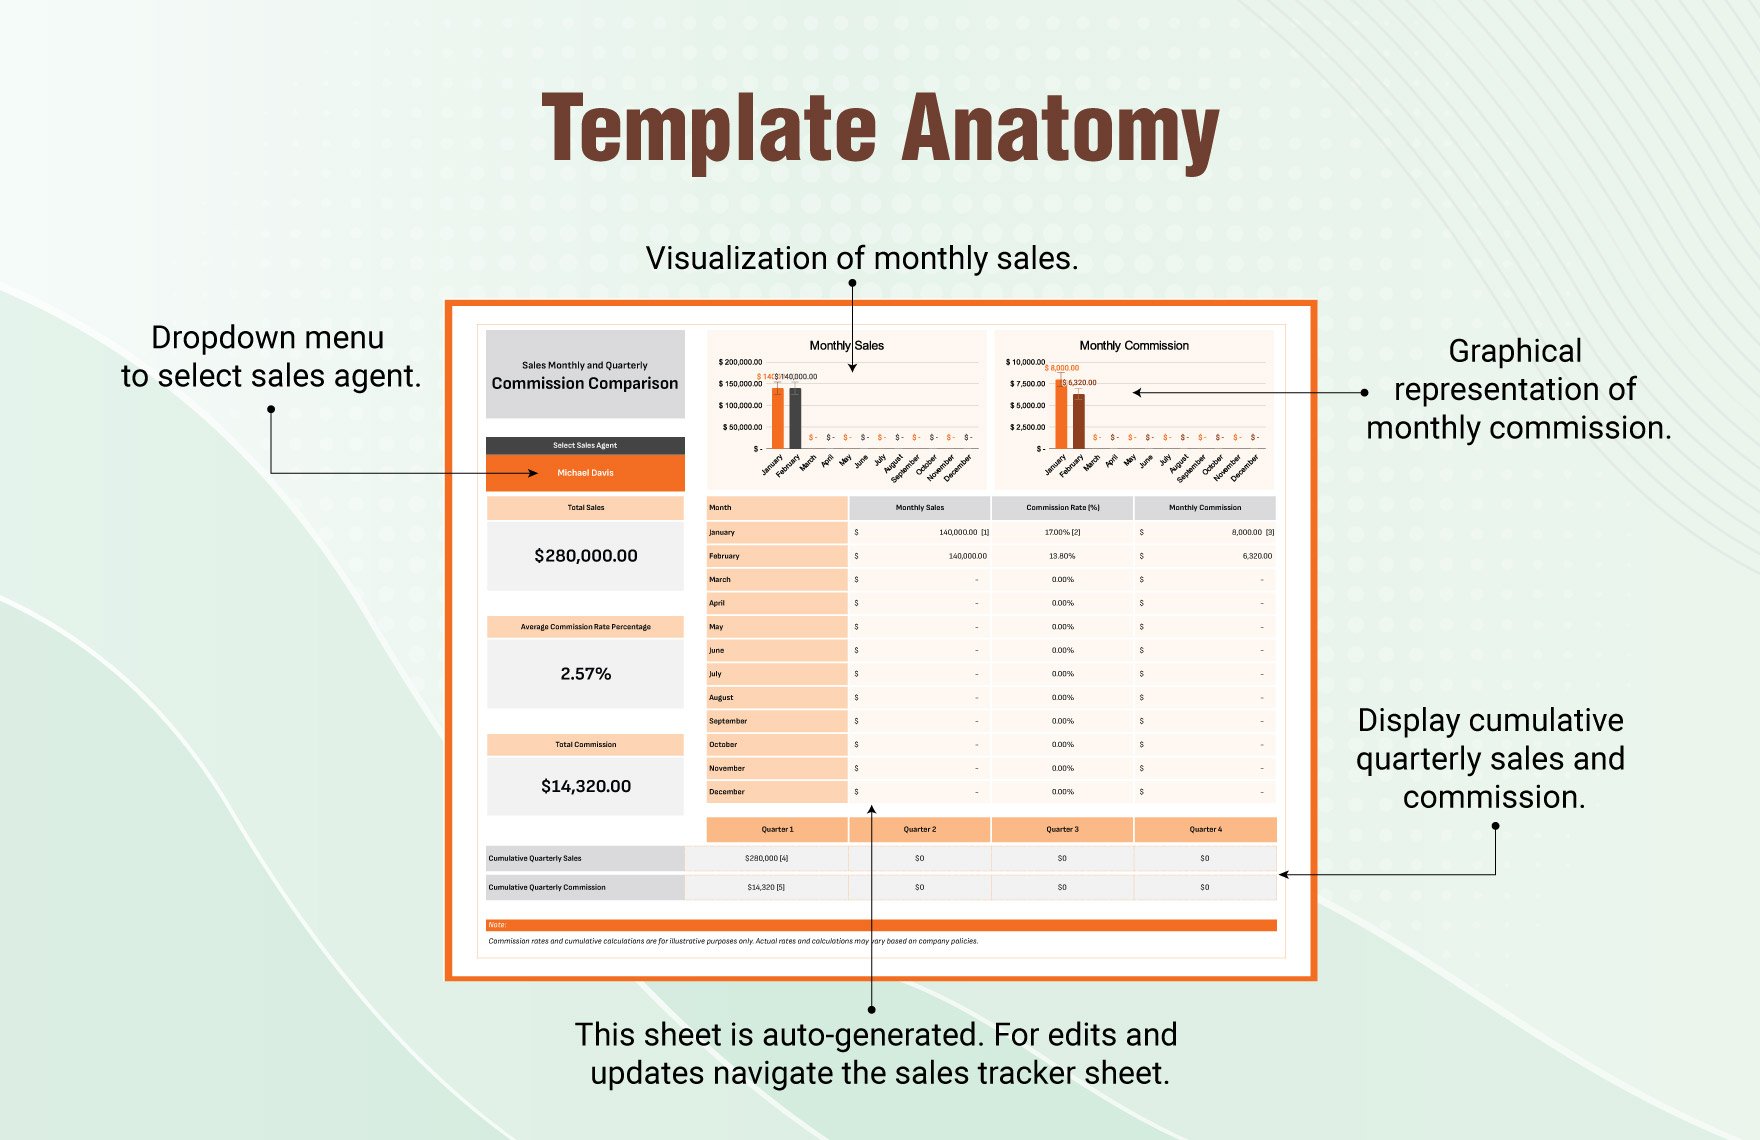 Sales Monthly and Quarterly Commission Comparison Template